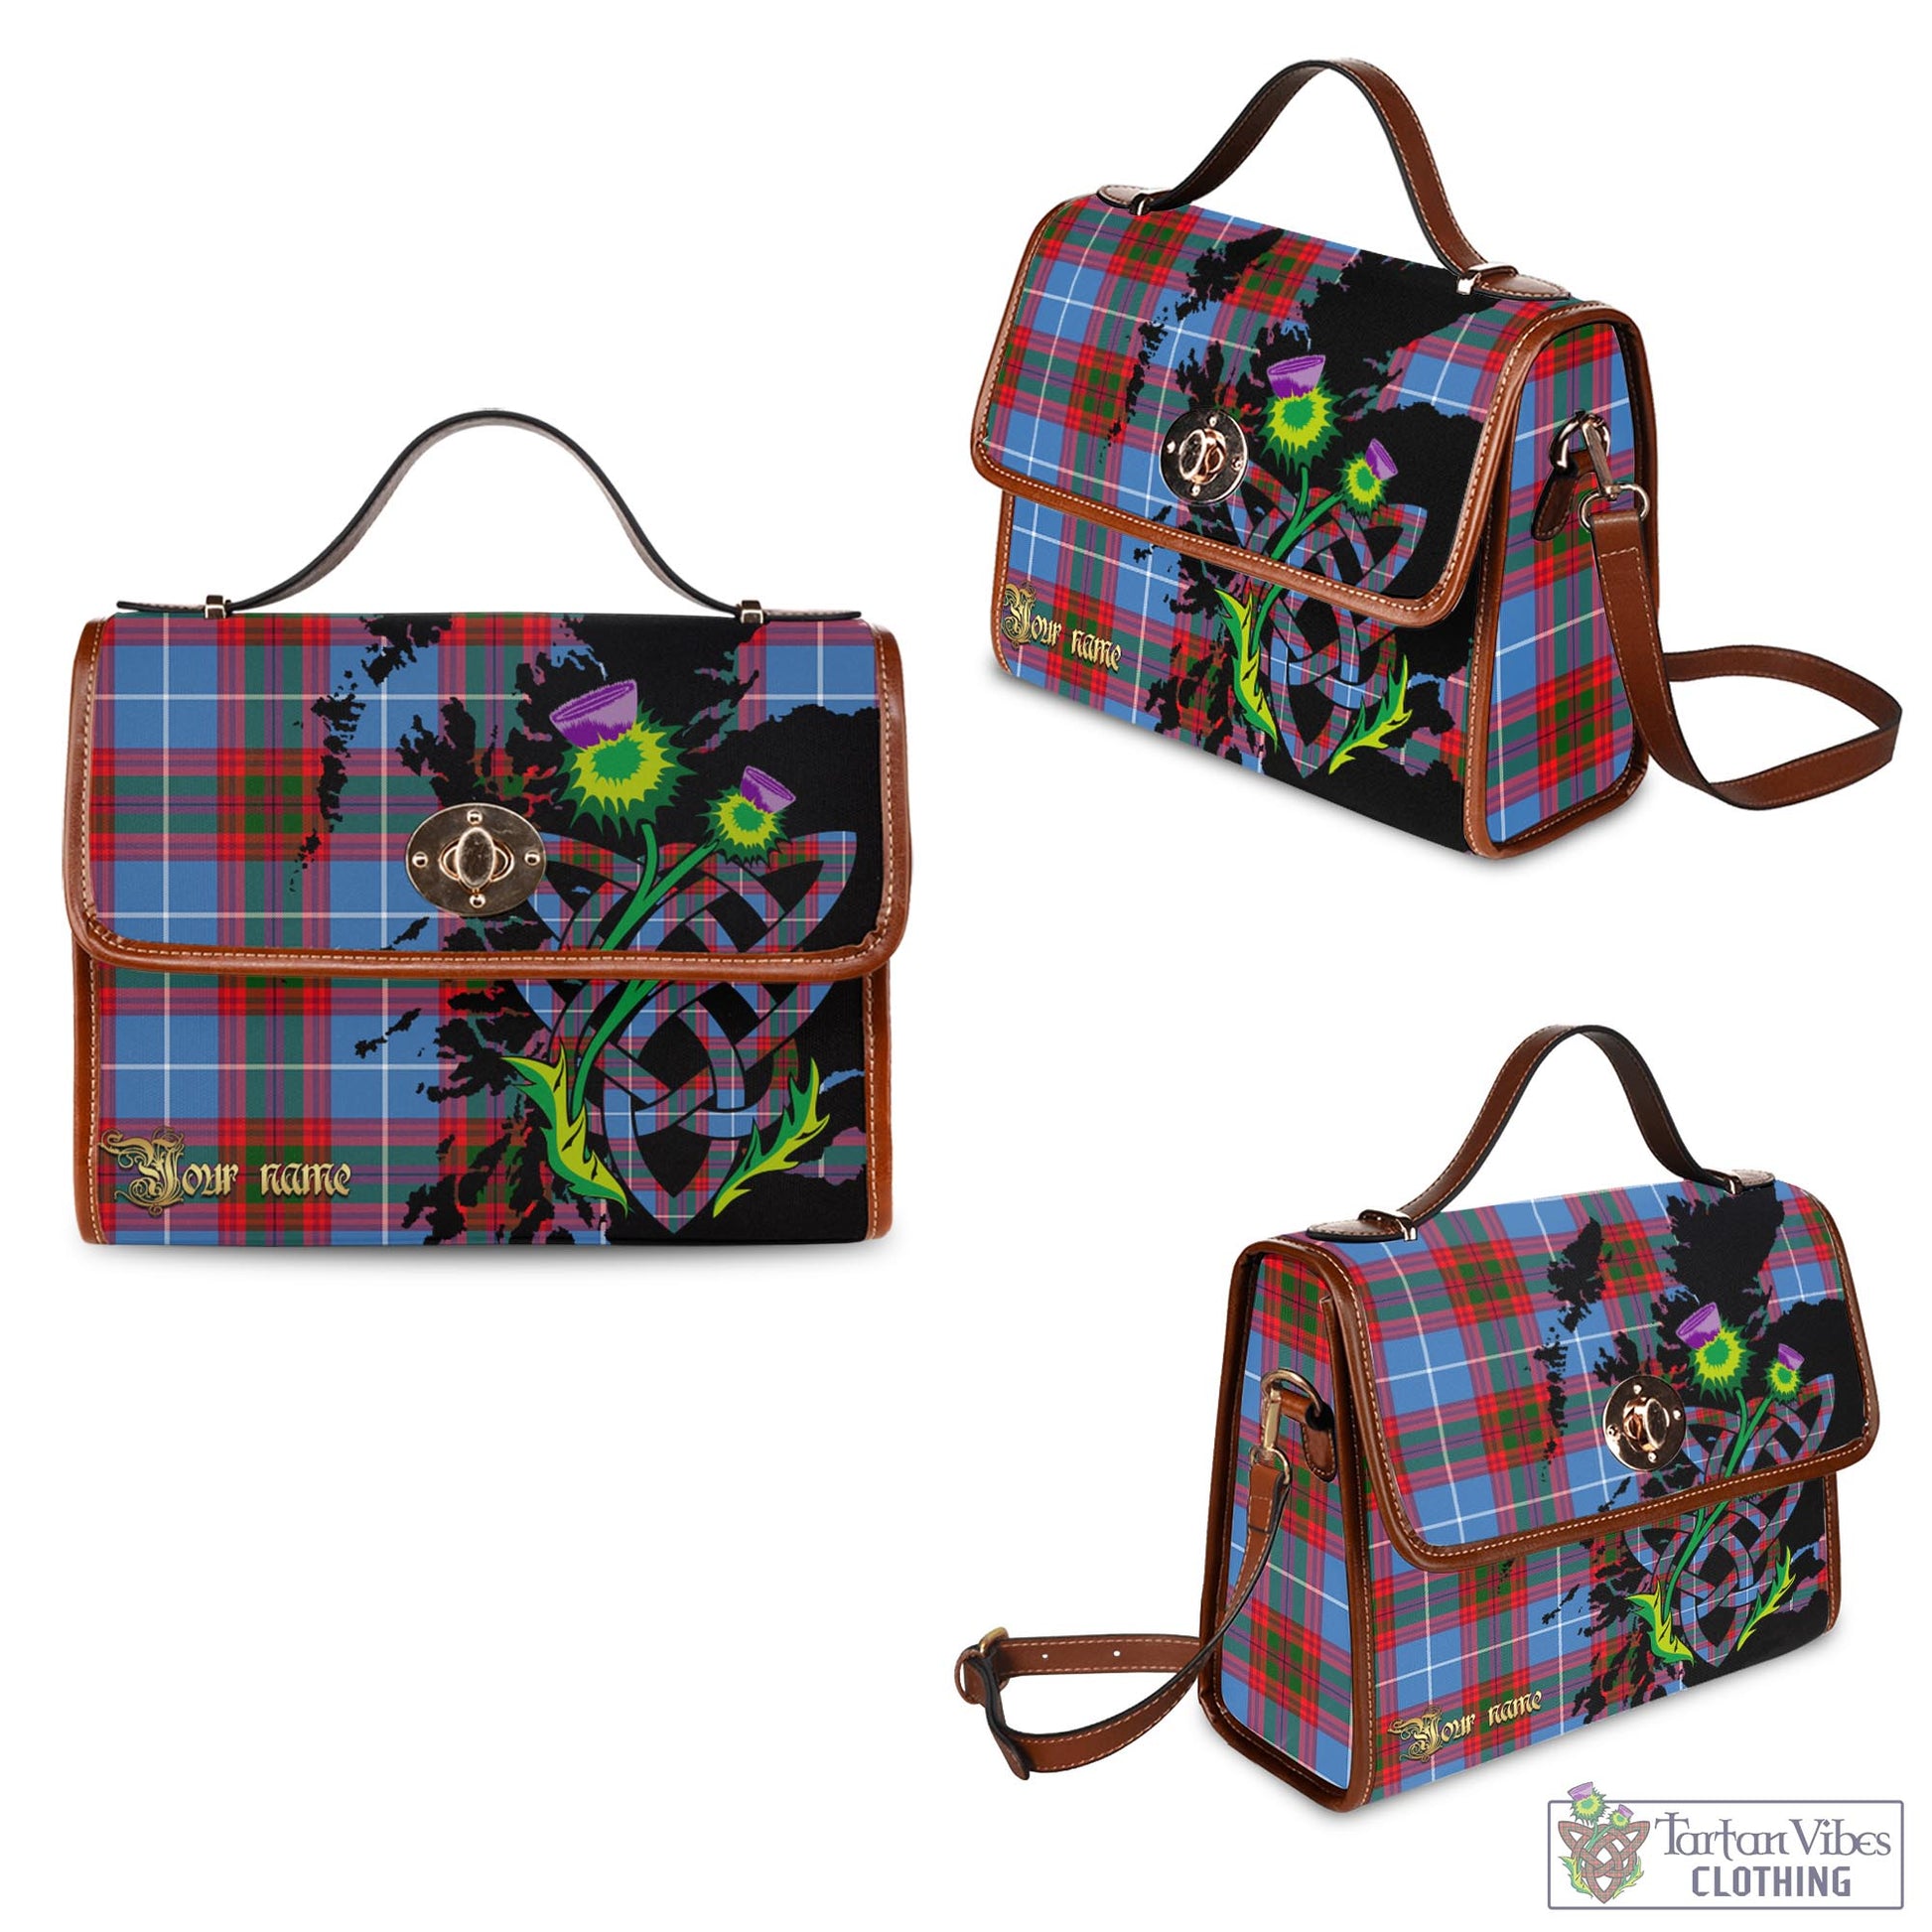 Tartan Vibes Clothing Dalmahoy Tartan Waterproof Canvas Bag with Scotland Map and Thistle Celtic Accents